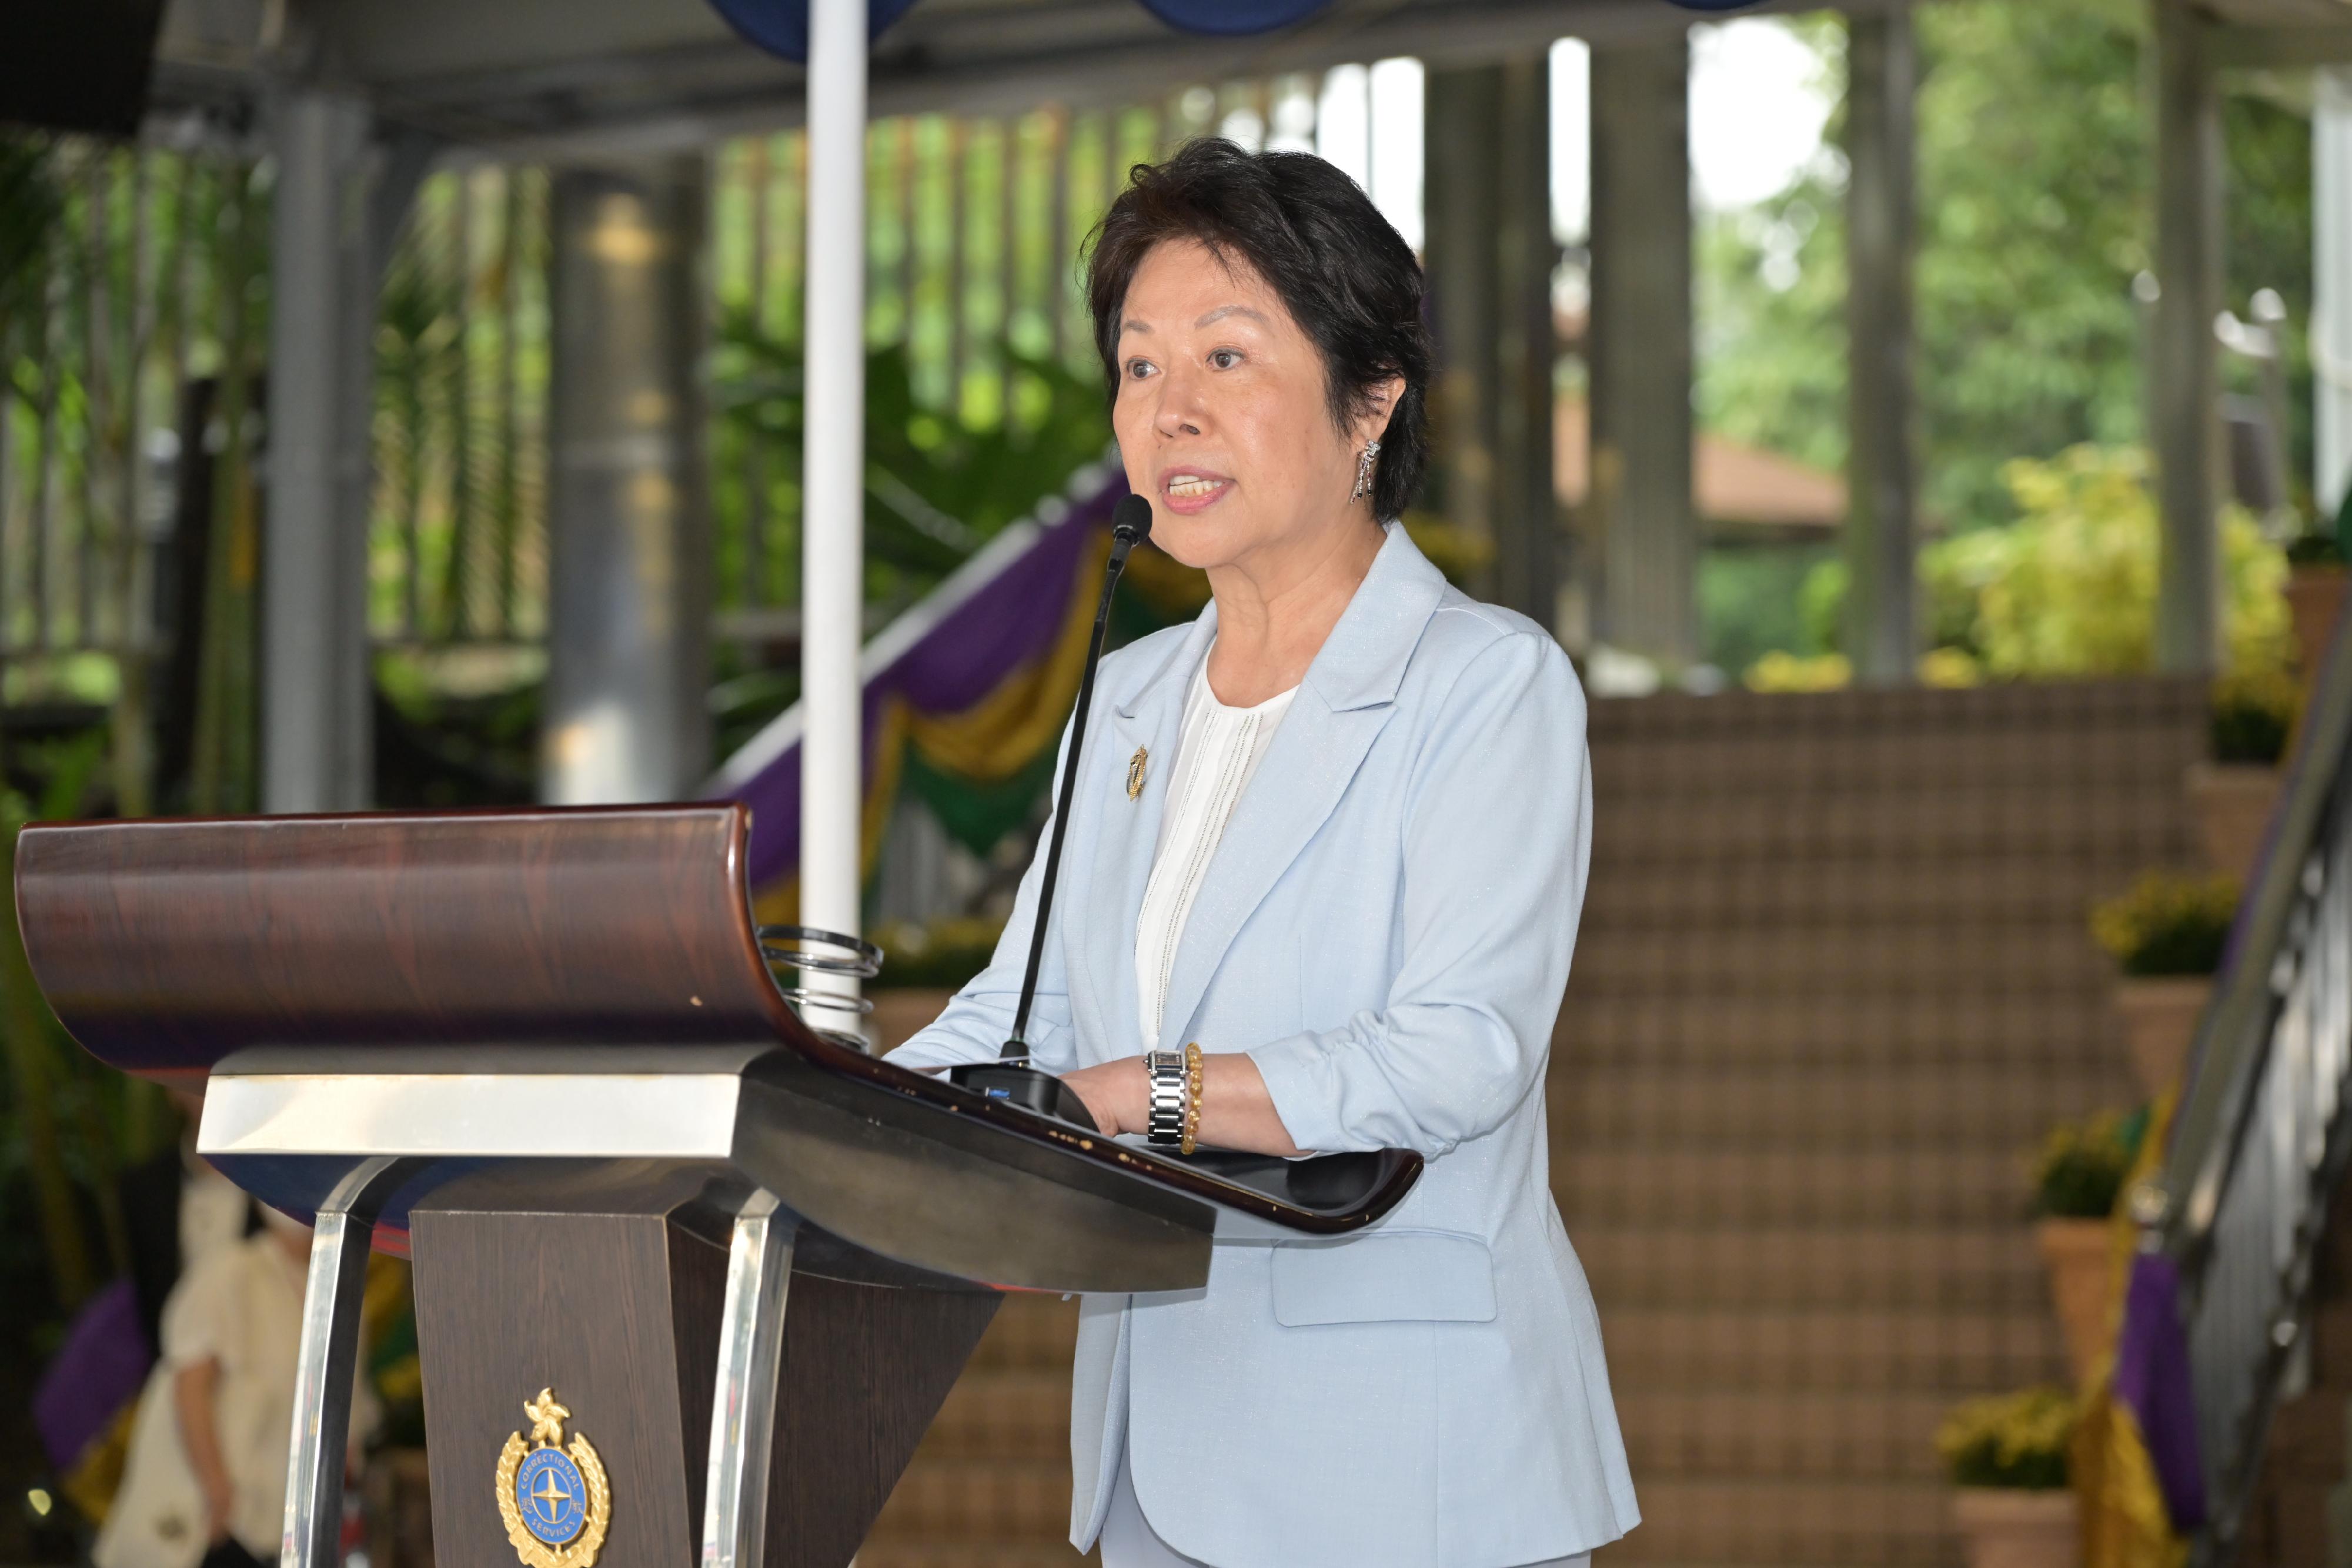 The Correctional Services Department held a passing-out parade at the Hong Kong Correctional Services Academy today (April 21). Photo shows the Chairman of the Committee on Community Support for Rehabilitated Offenders, Ms Tsui Li, delivering a speech.